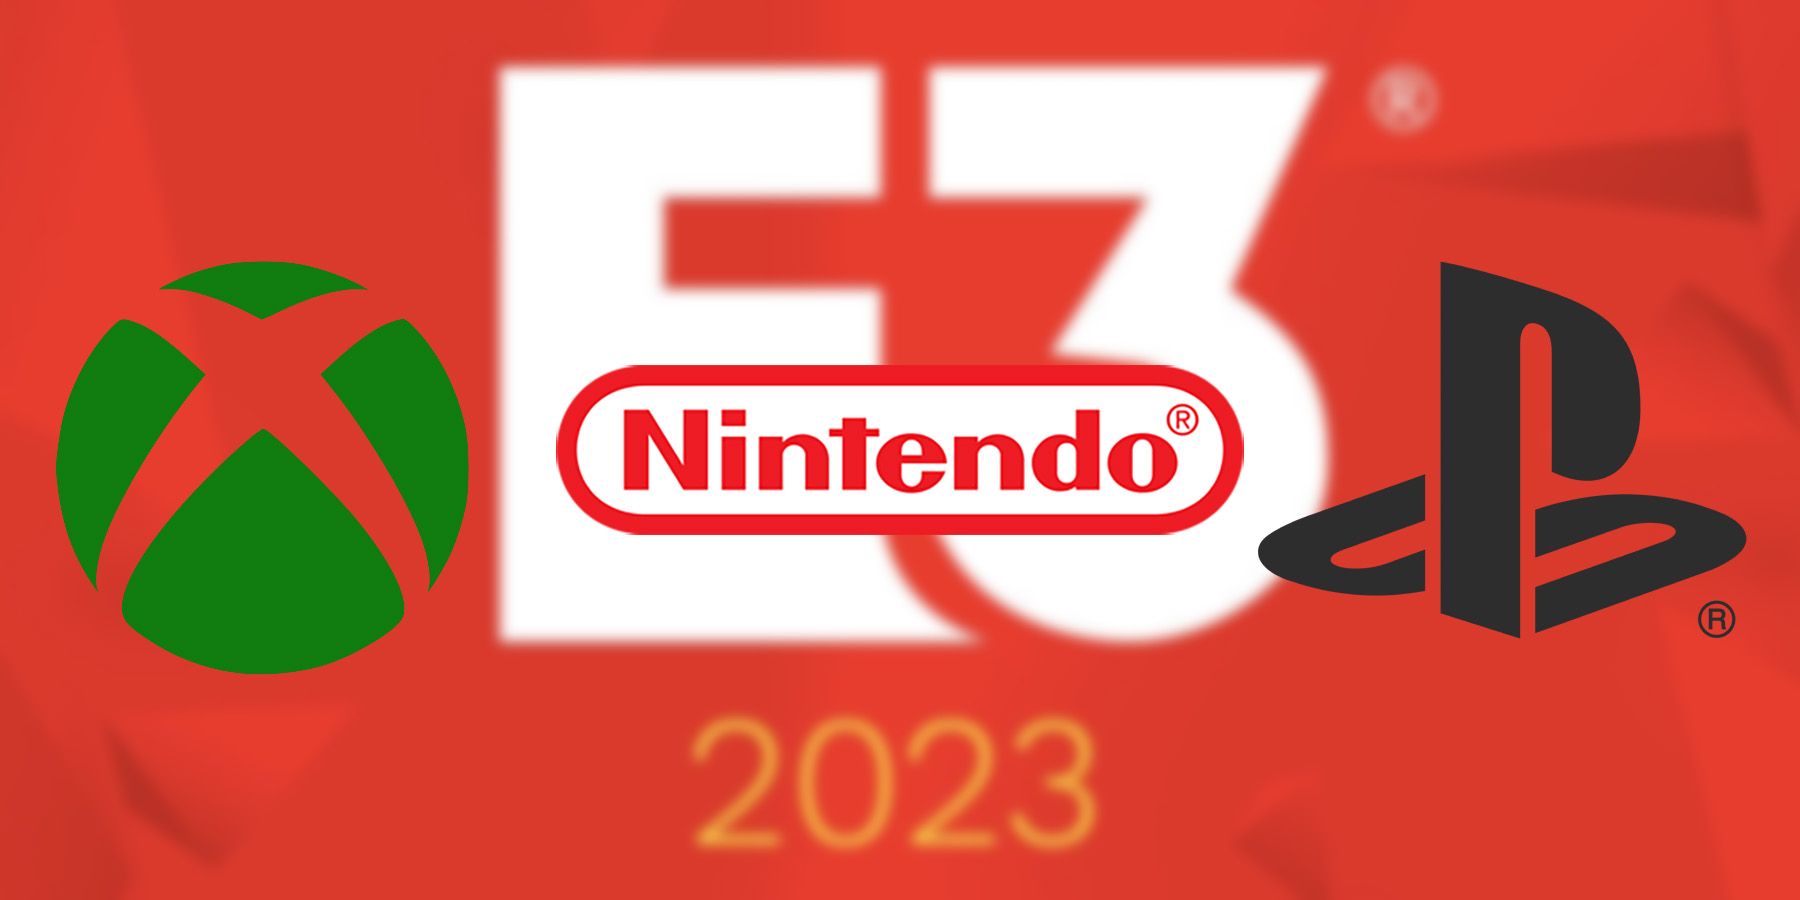 xbox, nintendo, and playstation logo over the blurred logo of e3 2022